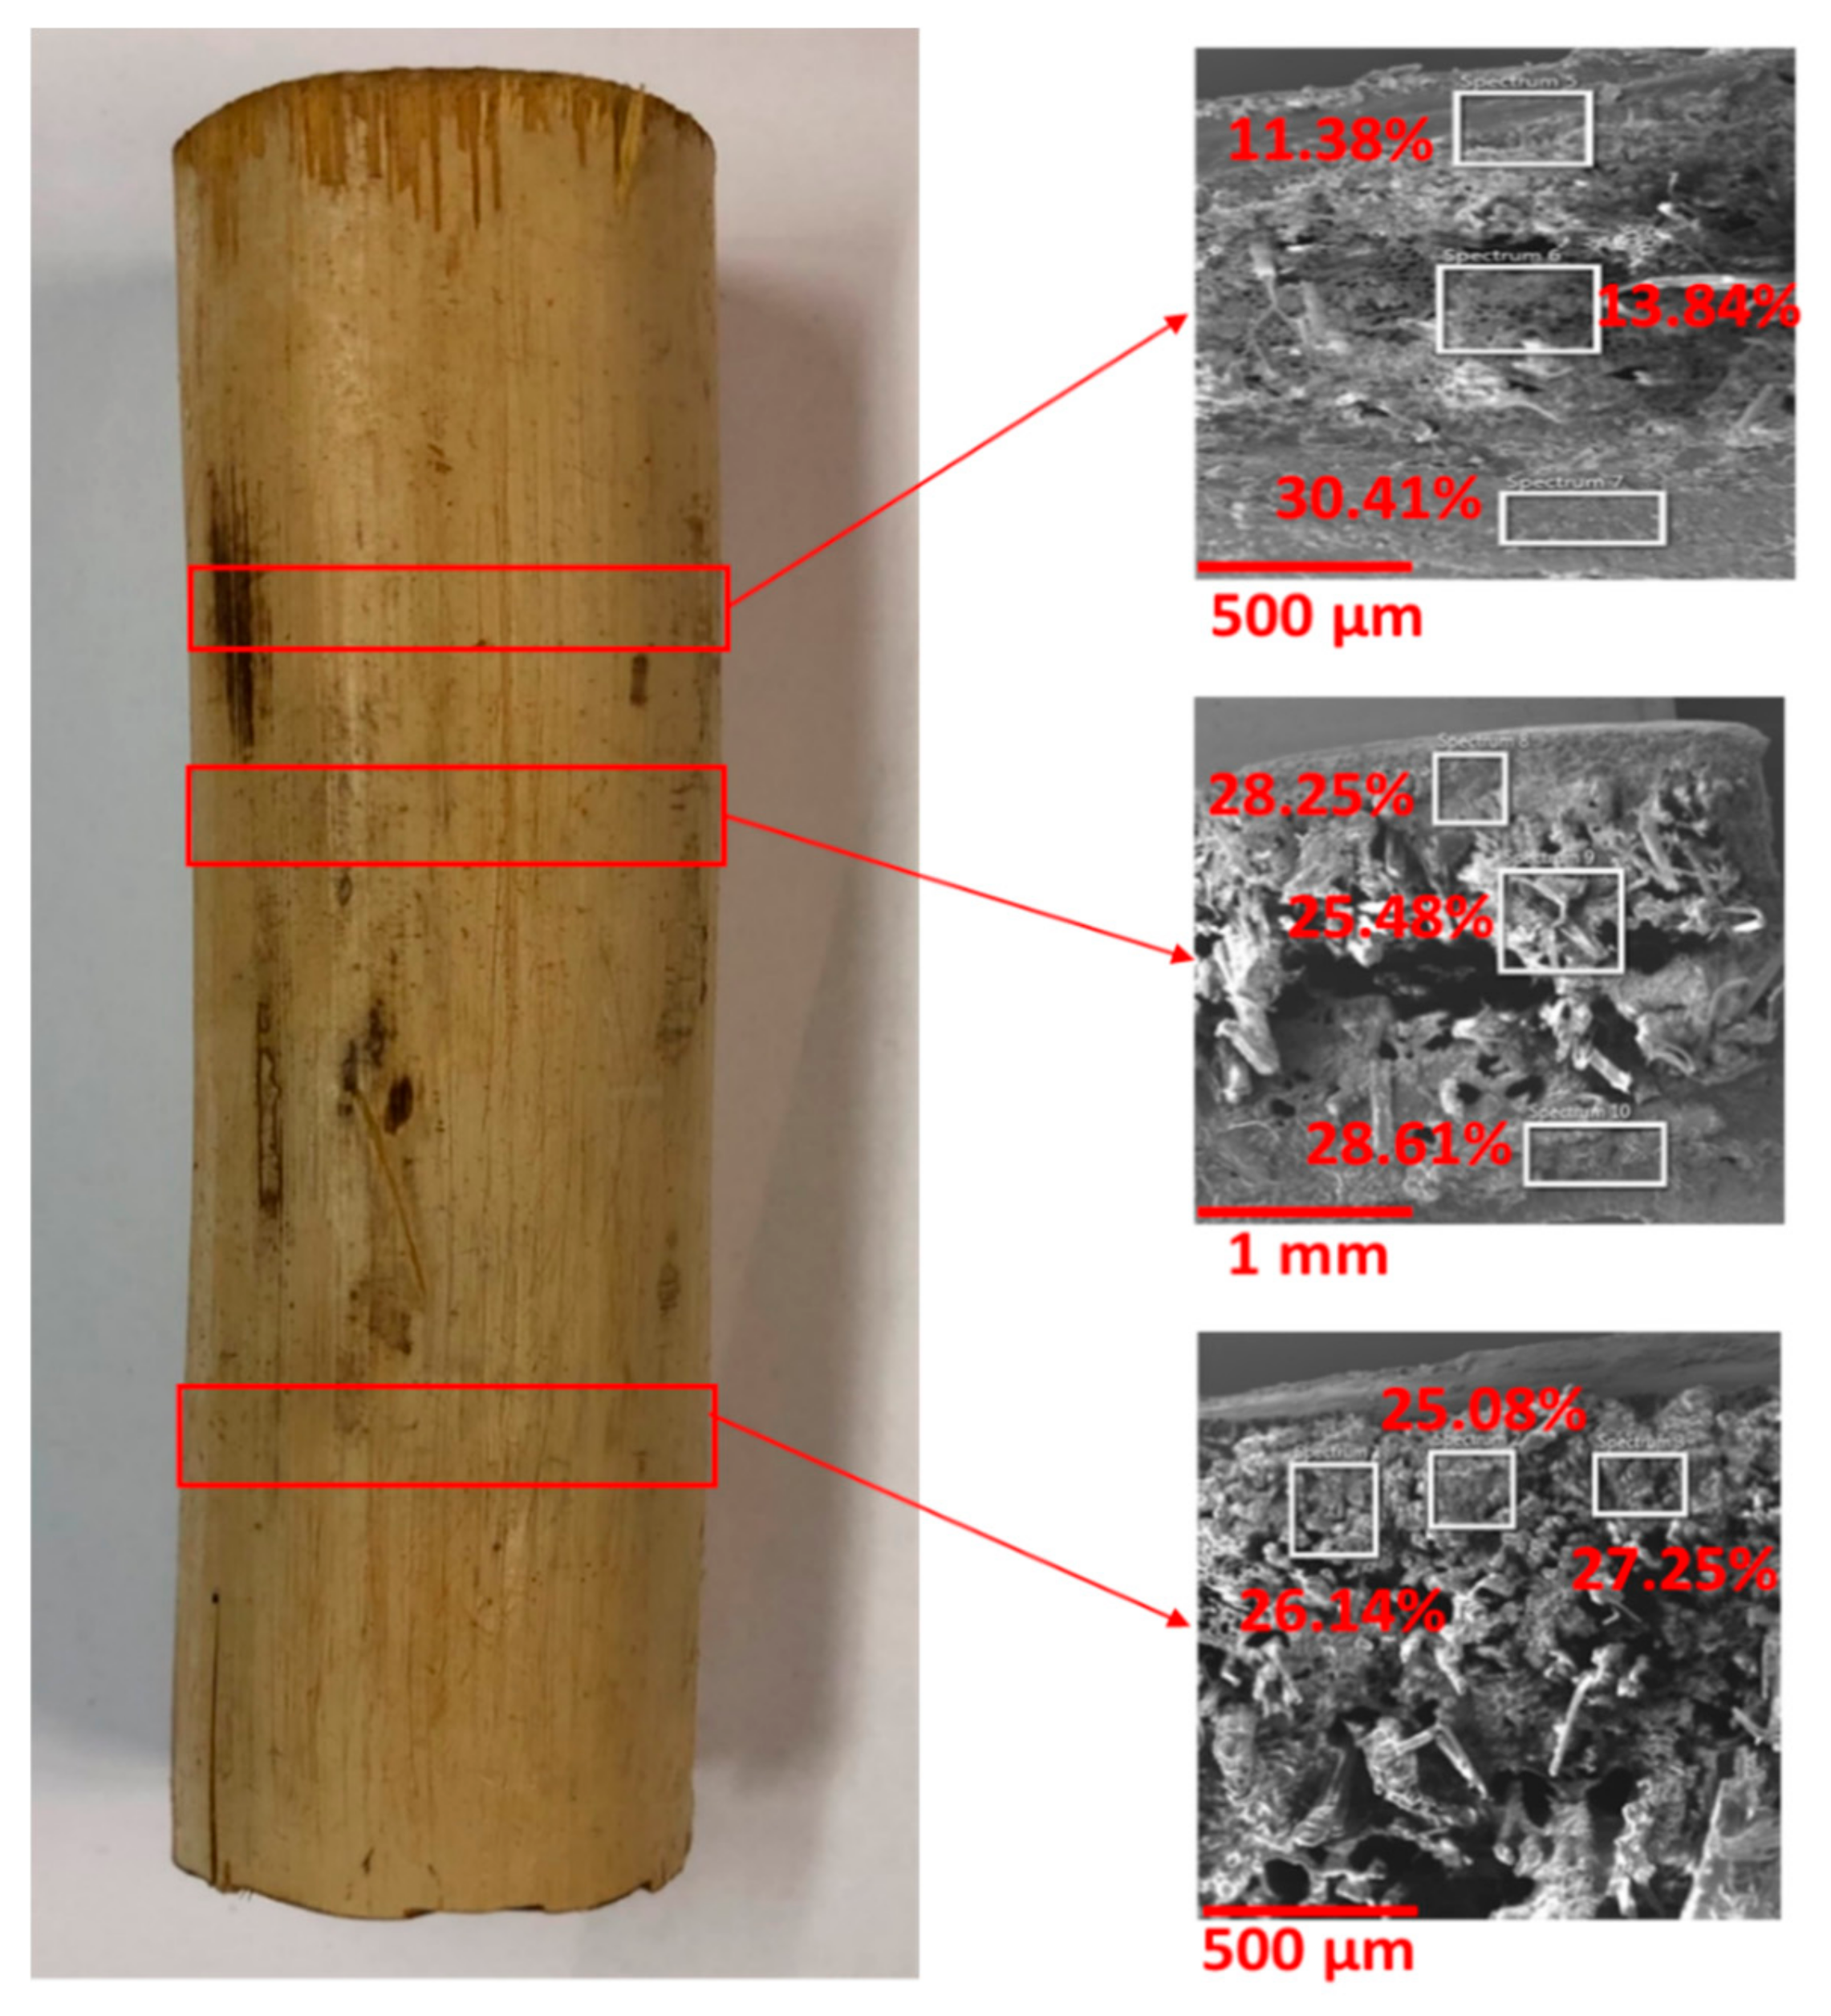 An improved plastination method for strengthening bamboo culms